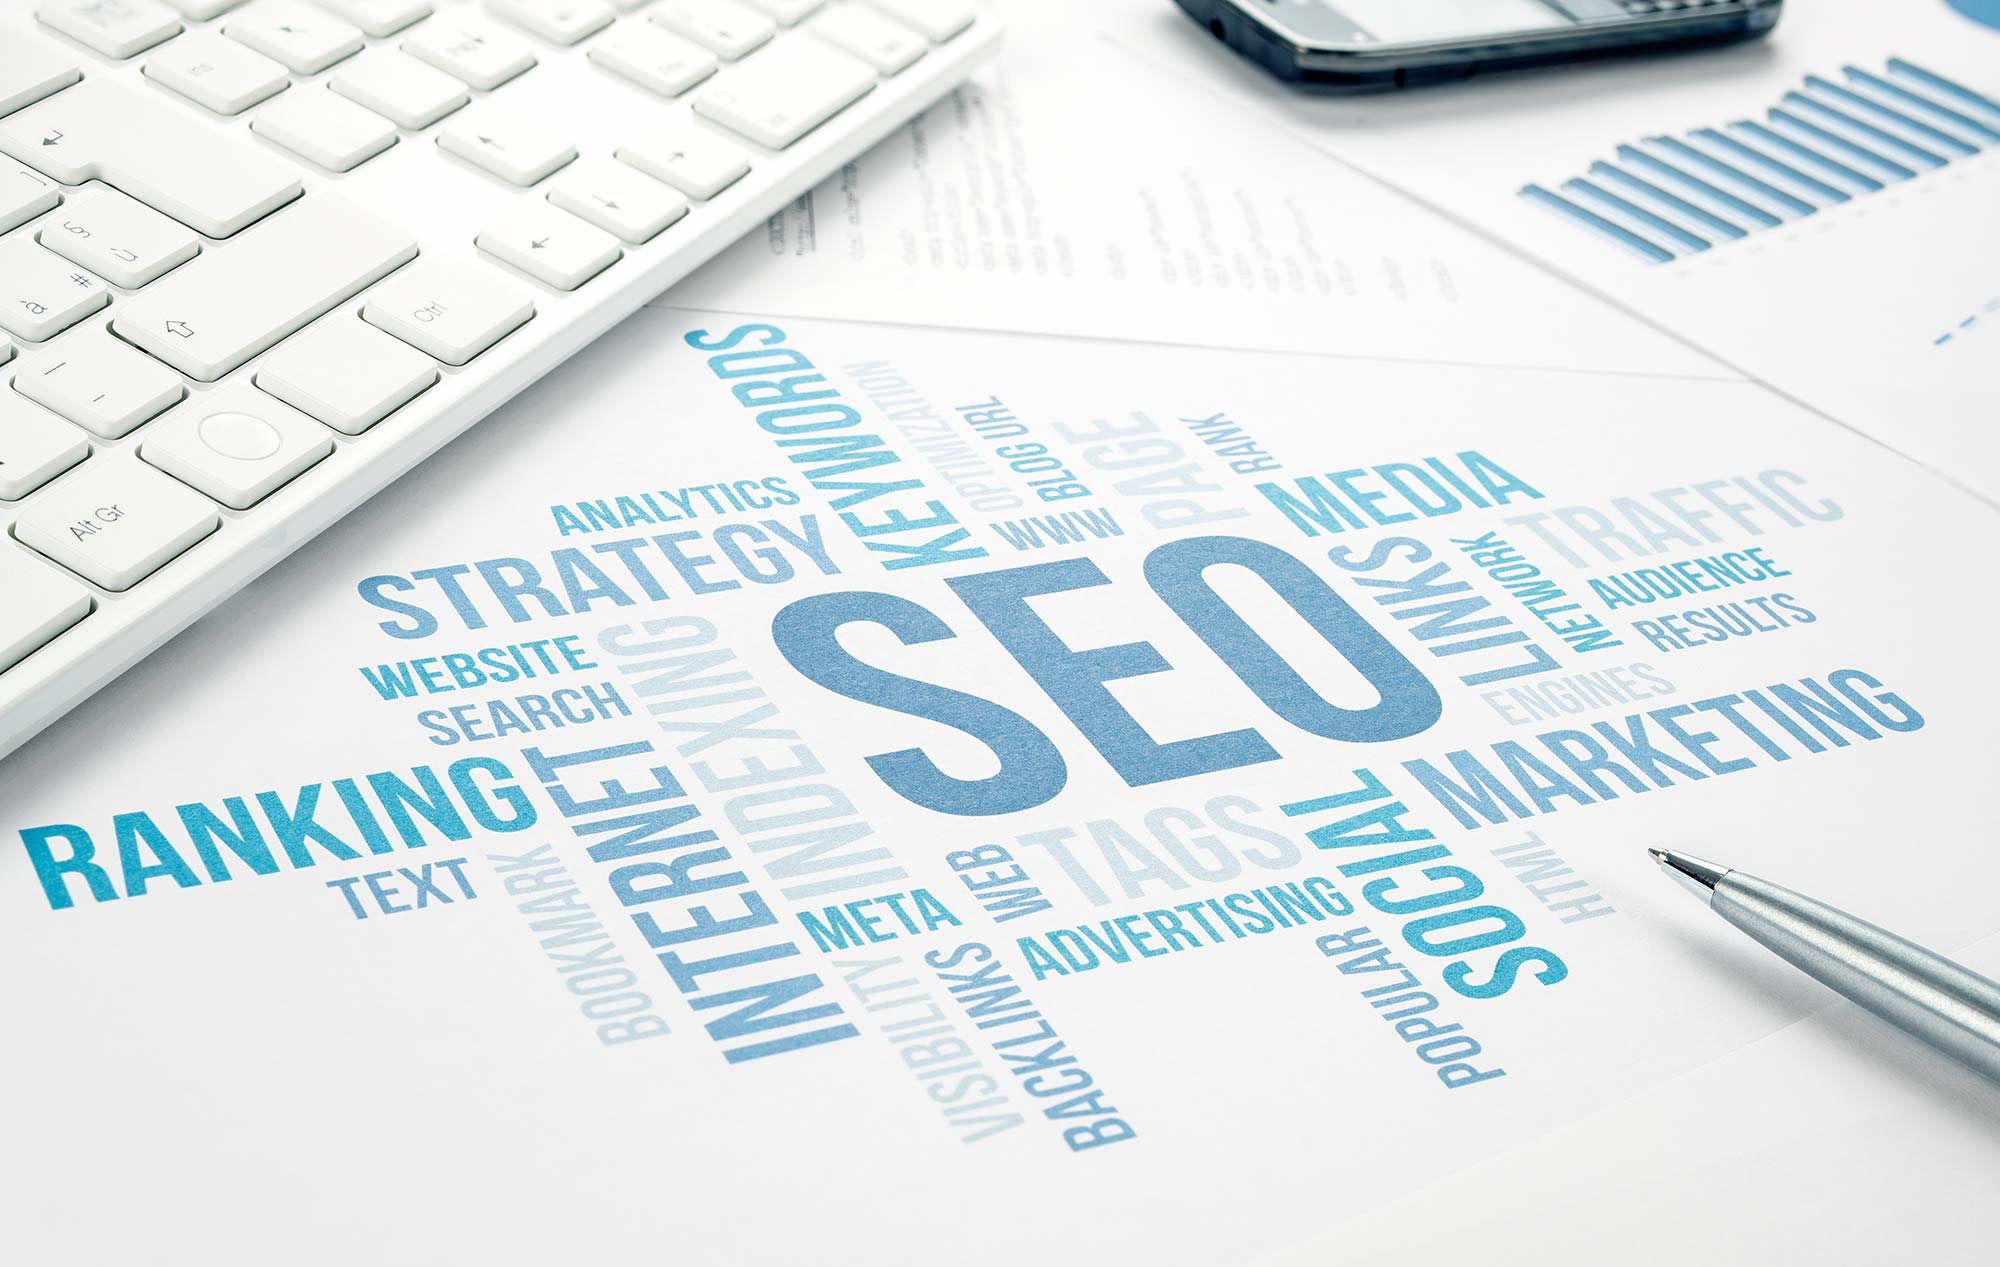 The Best Type Of SEO Service